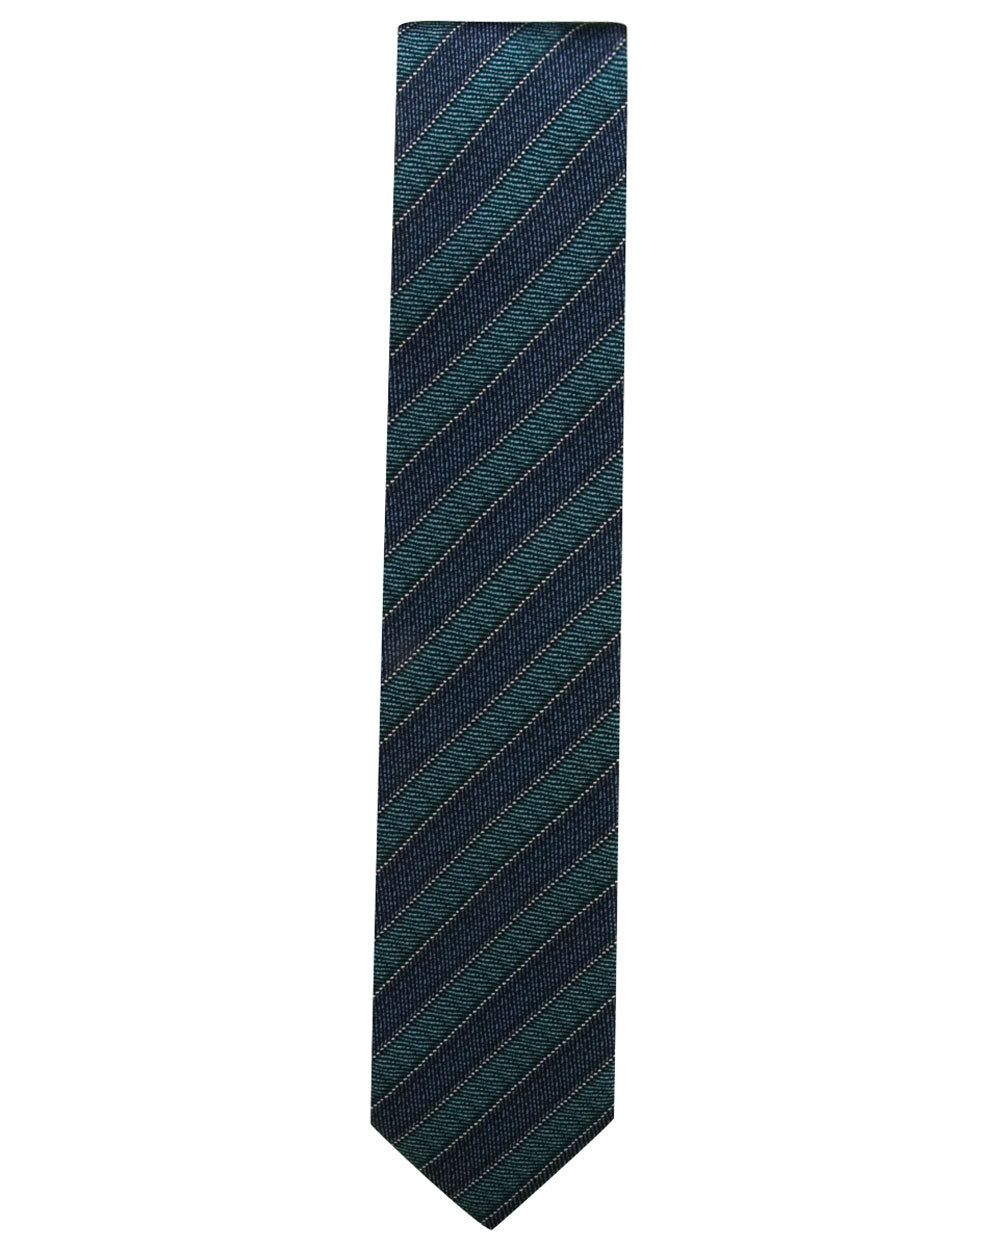 Green and Blue Striped Tie